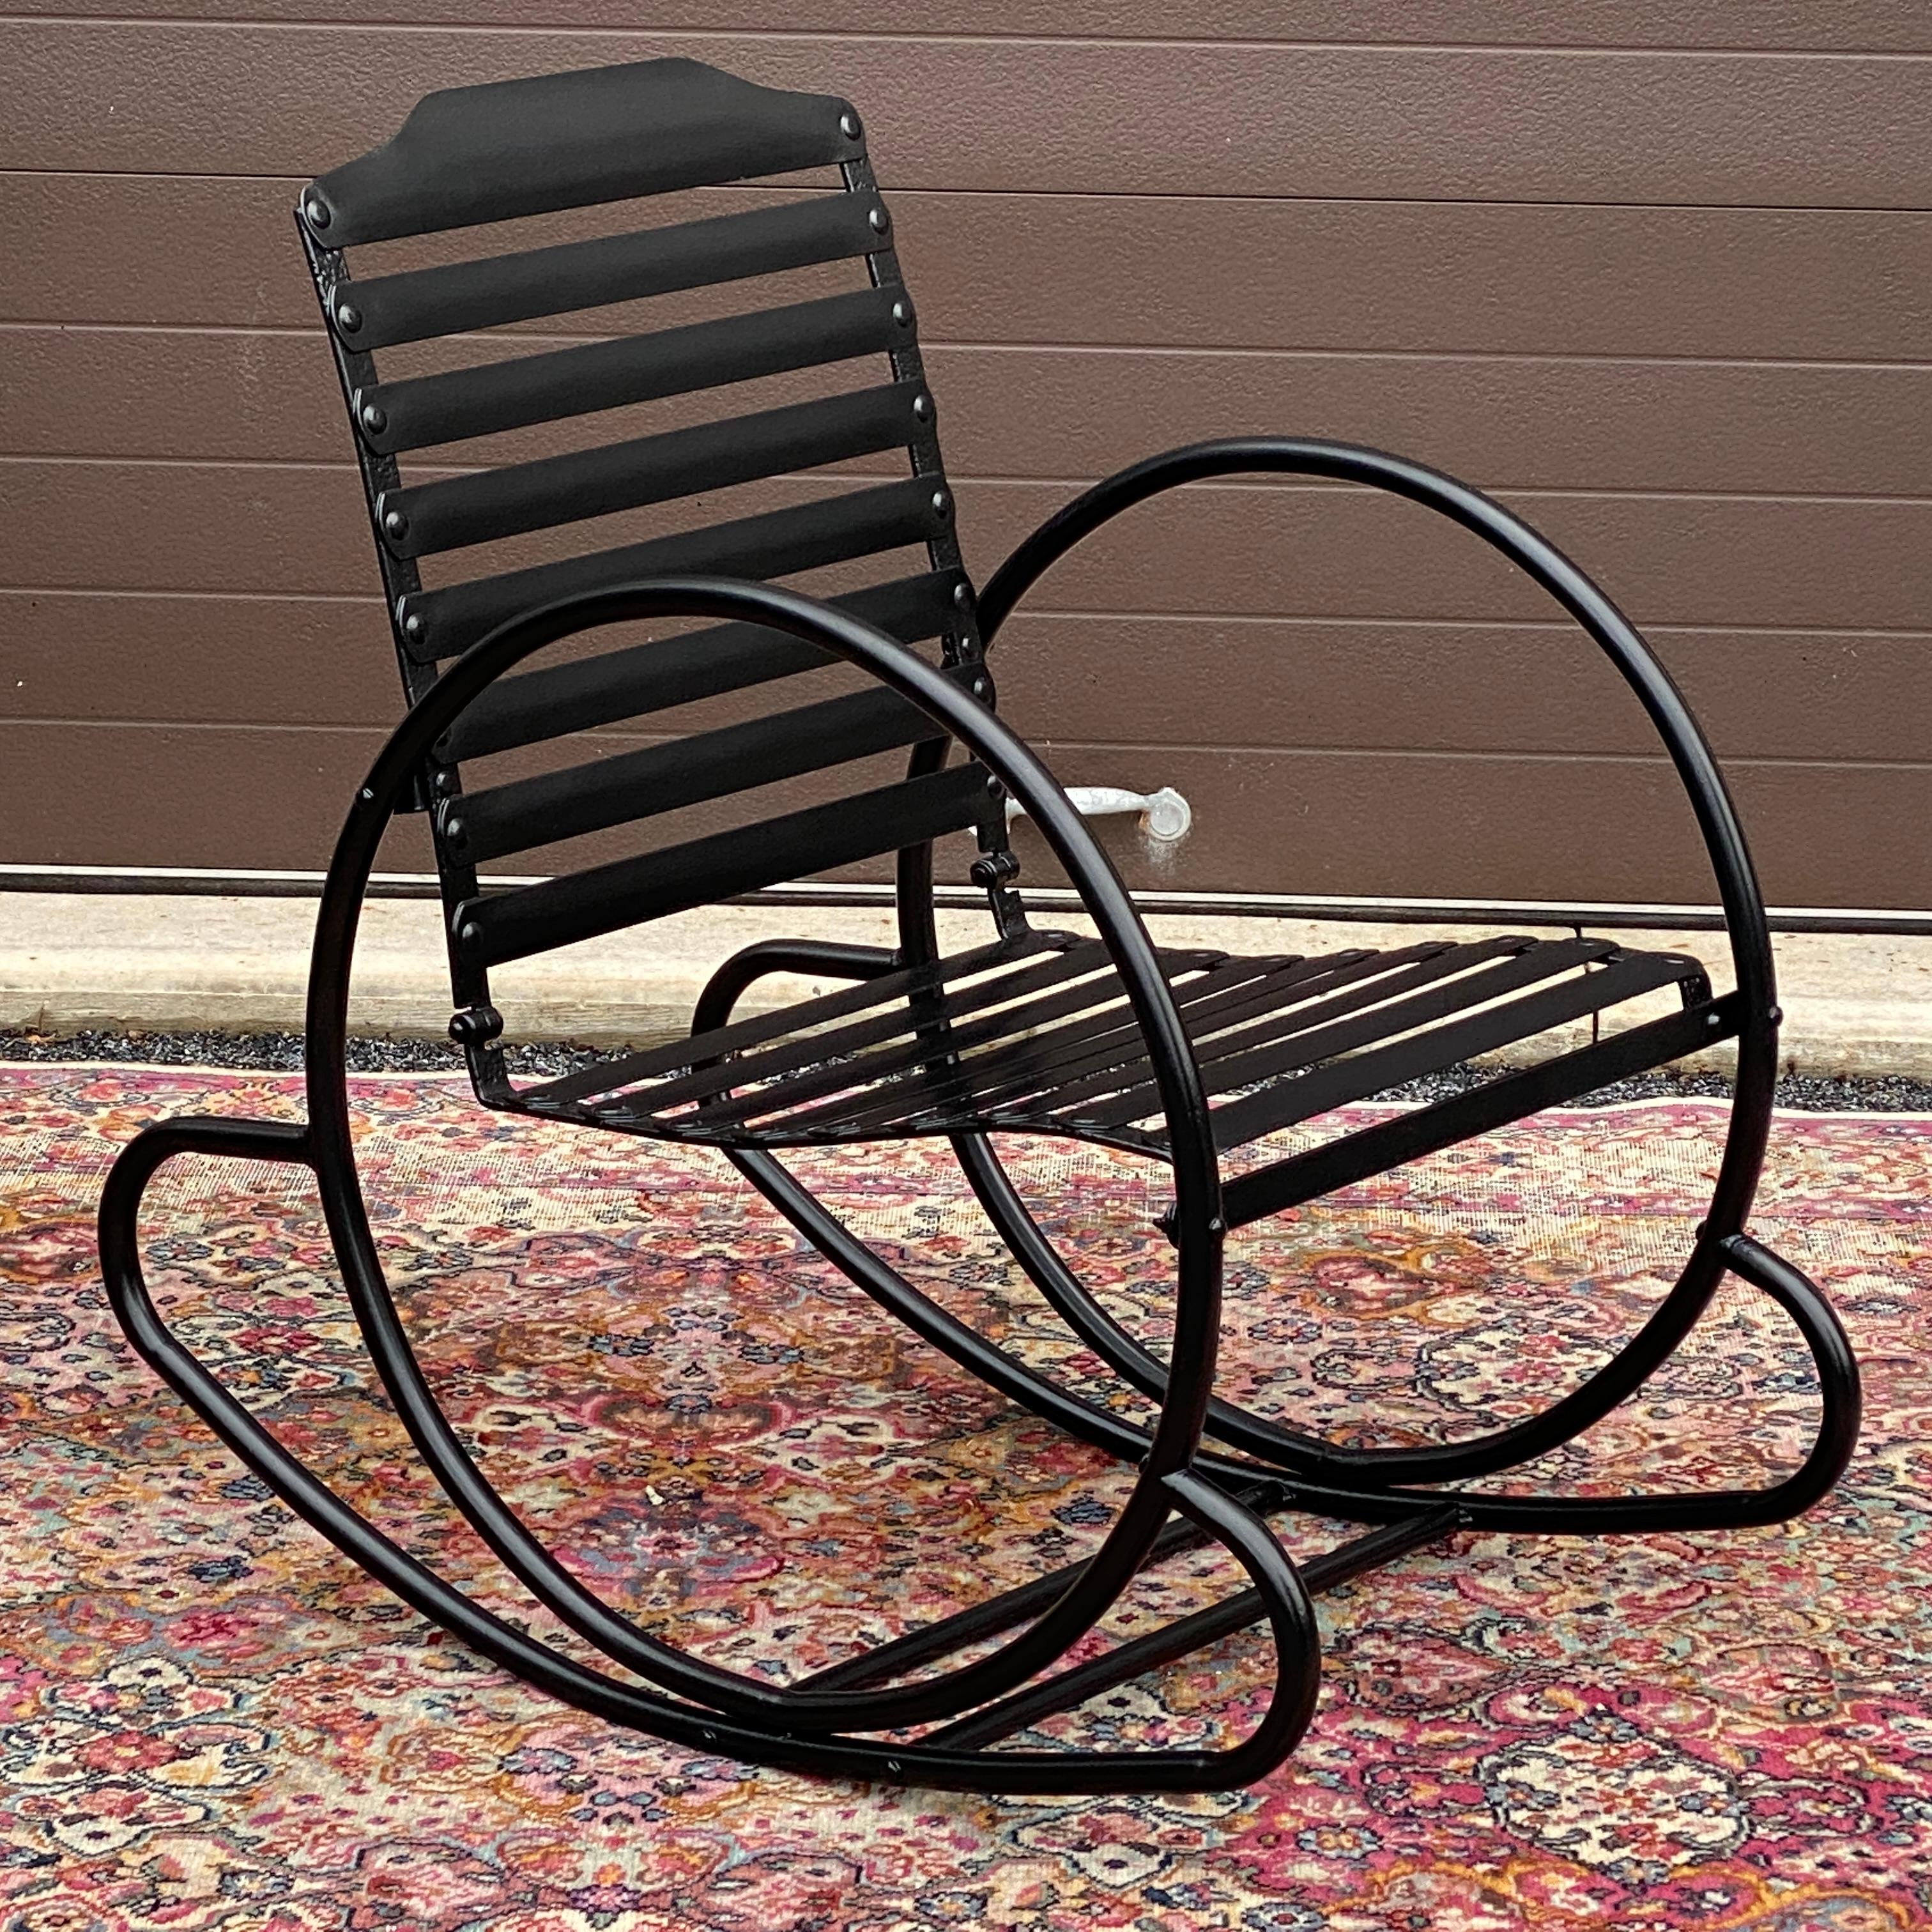 An amazing and rare streamlined American Art Deco tubular rocking chair having circular hoop sides, slat backs and seats with heavy steel or iron construction throughout. Suitable for indoors or outdoor use! Circa 1930 unmarked. We had this chair